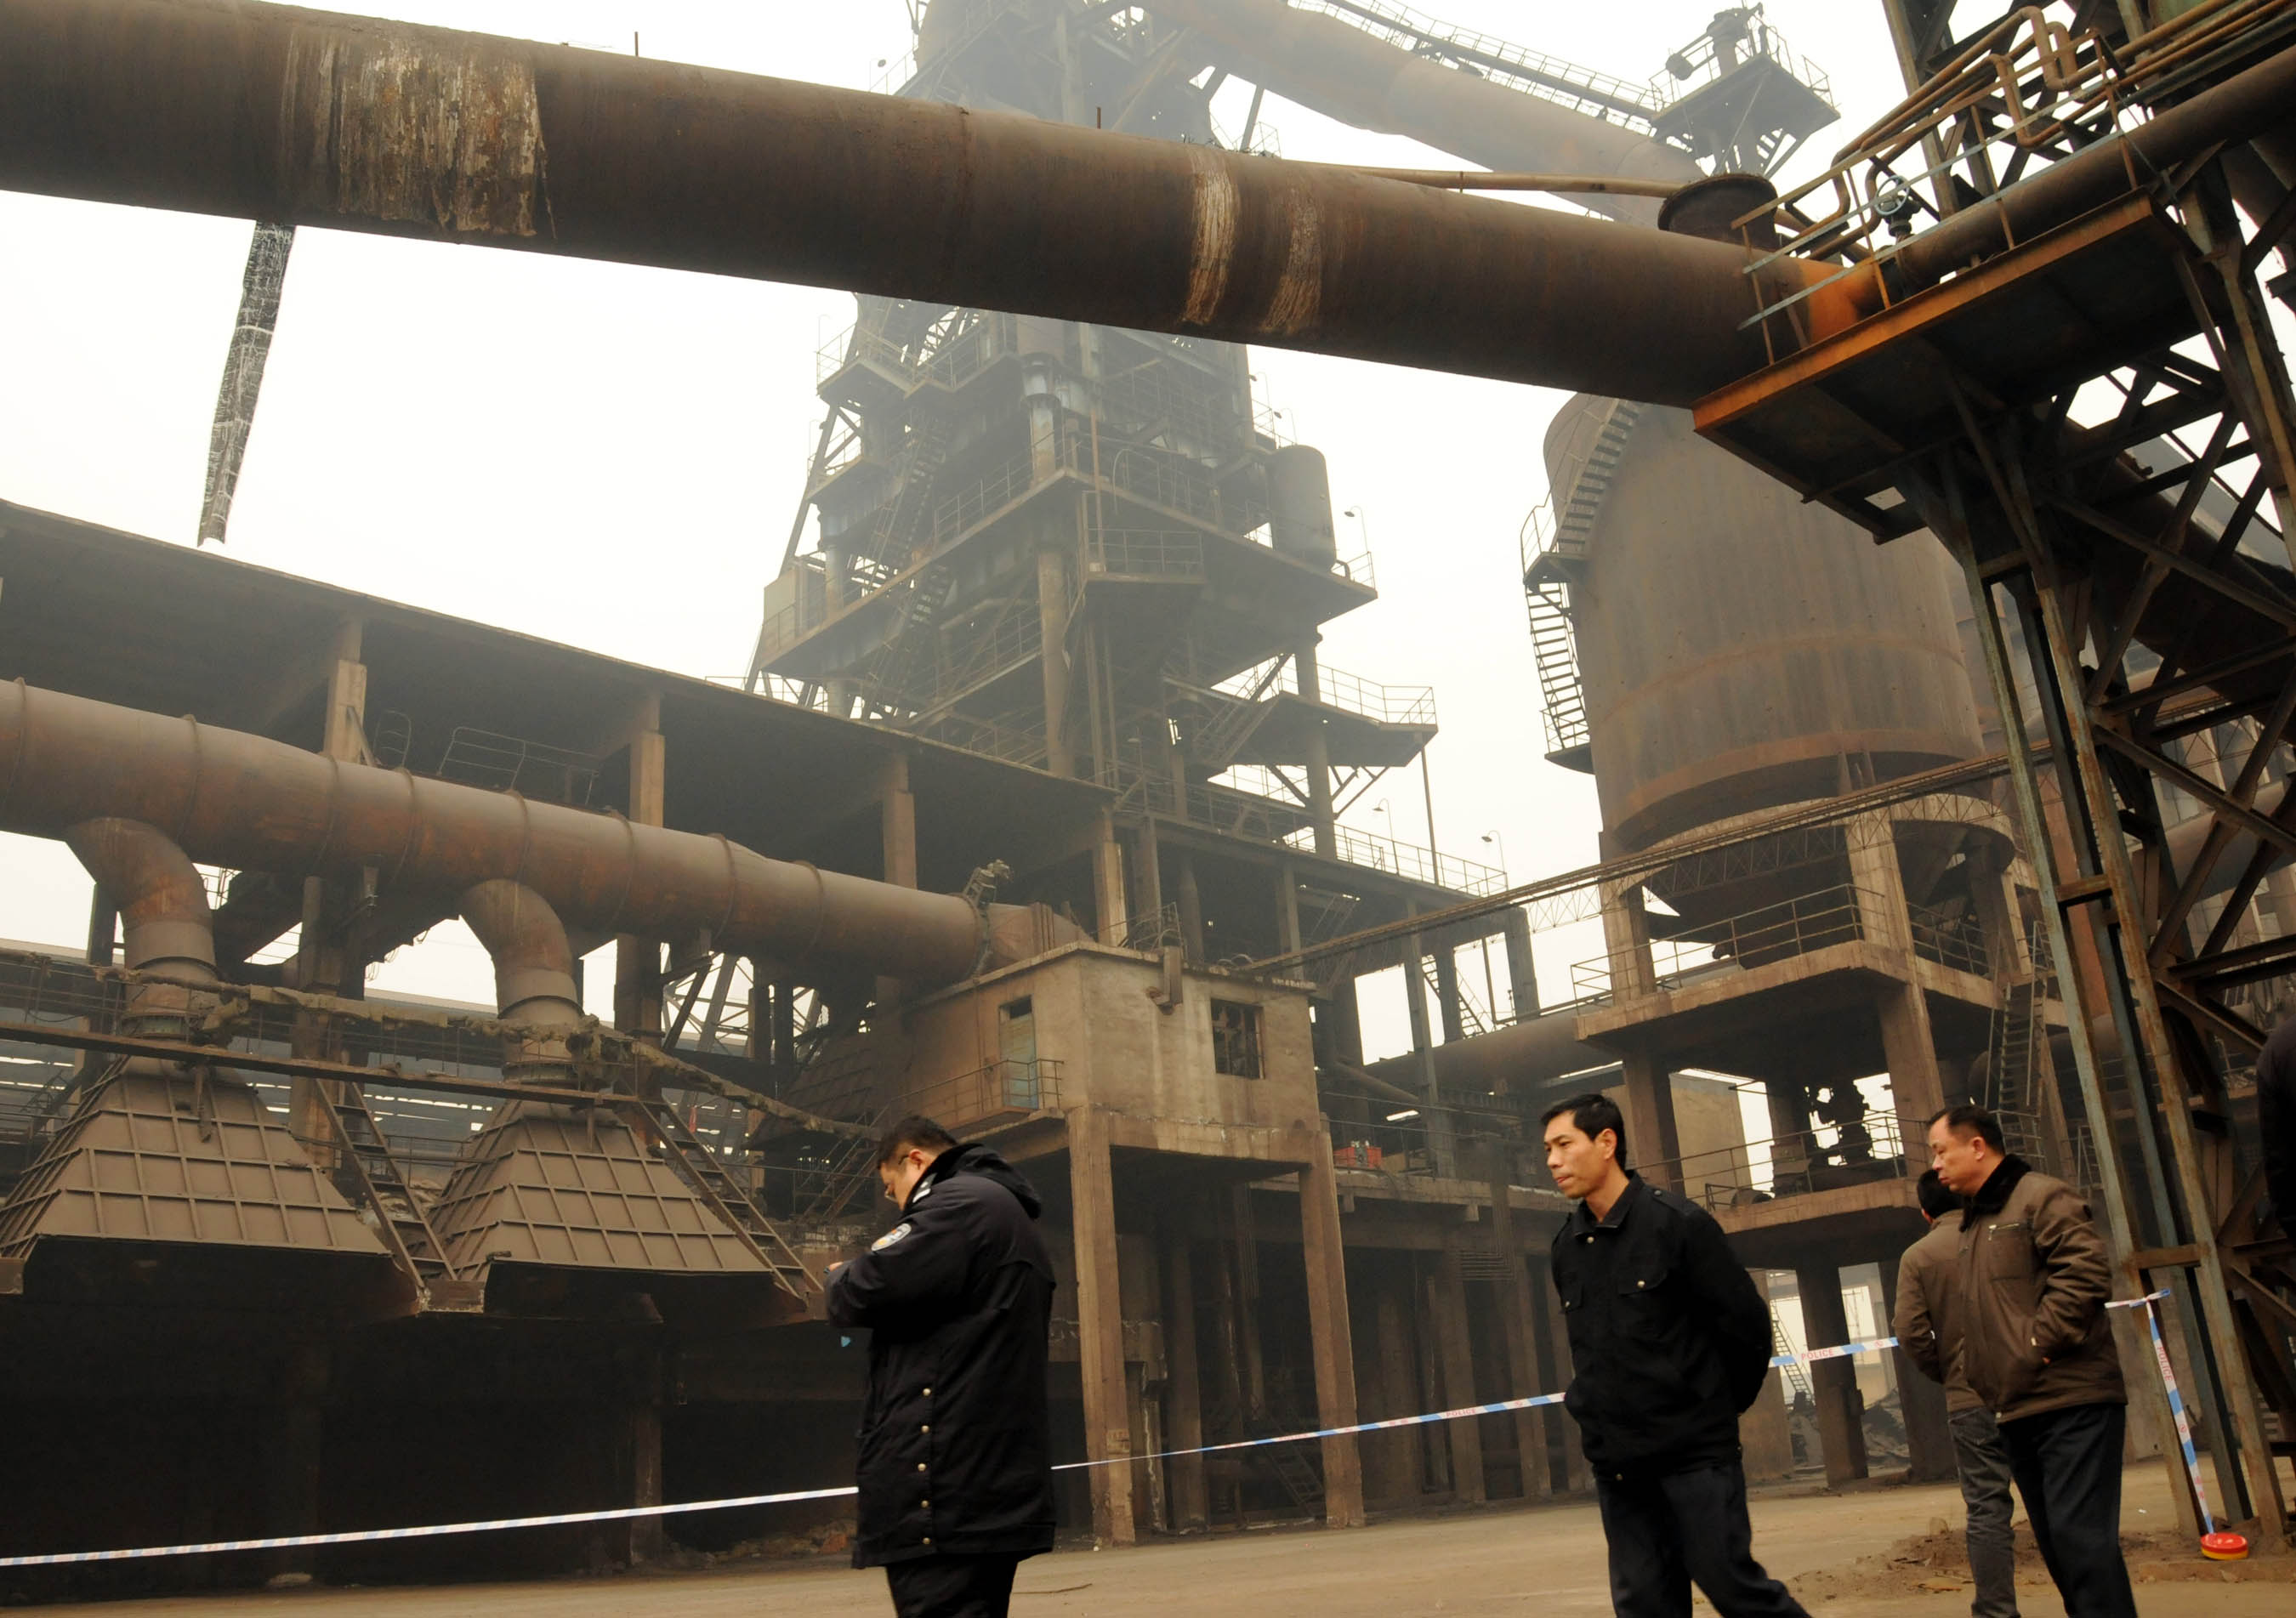 Photo taken on January 18, 2010 shows the accident site at the Shunda Iron and Steel Co., Ltd. in Neiqiu County, north China's Hebei Province.